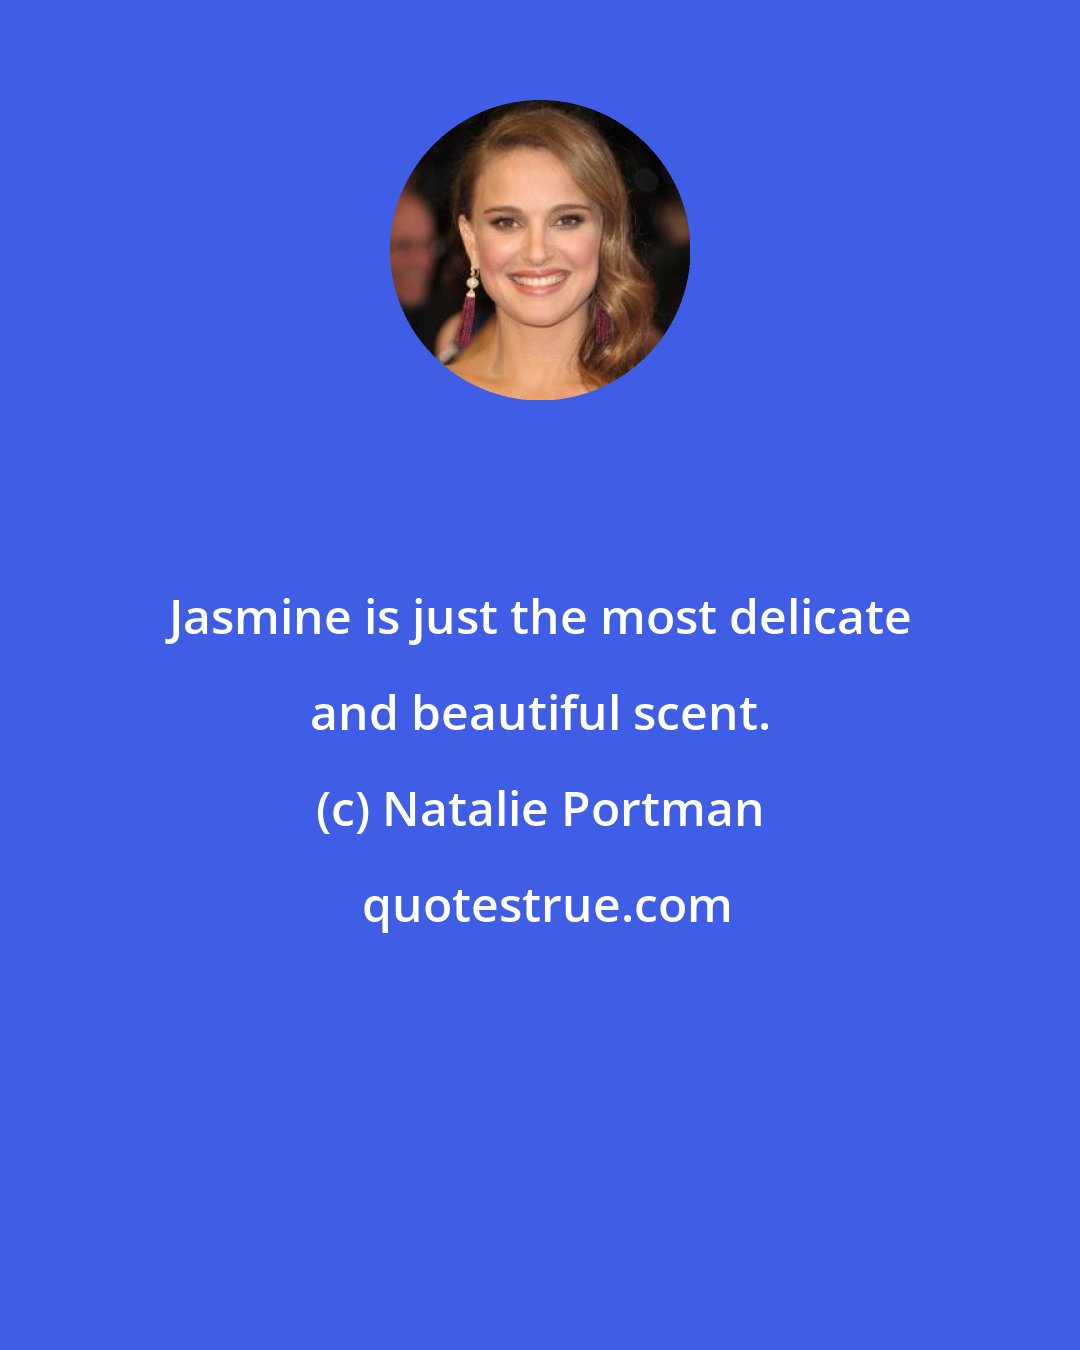 Natalie Portman: Jasmine is just the most delicate and beautiful scent.